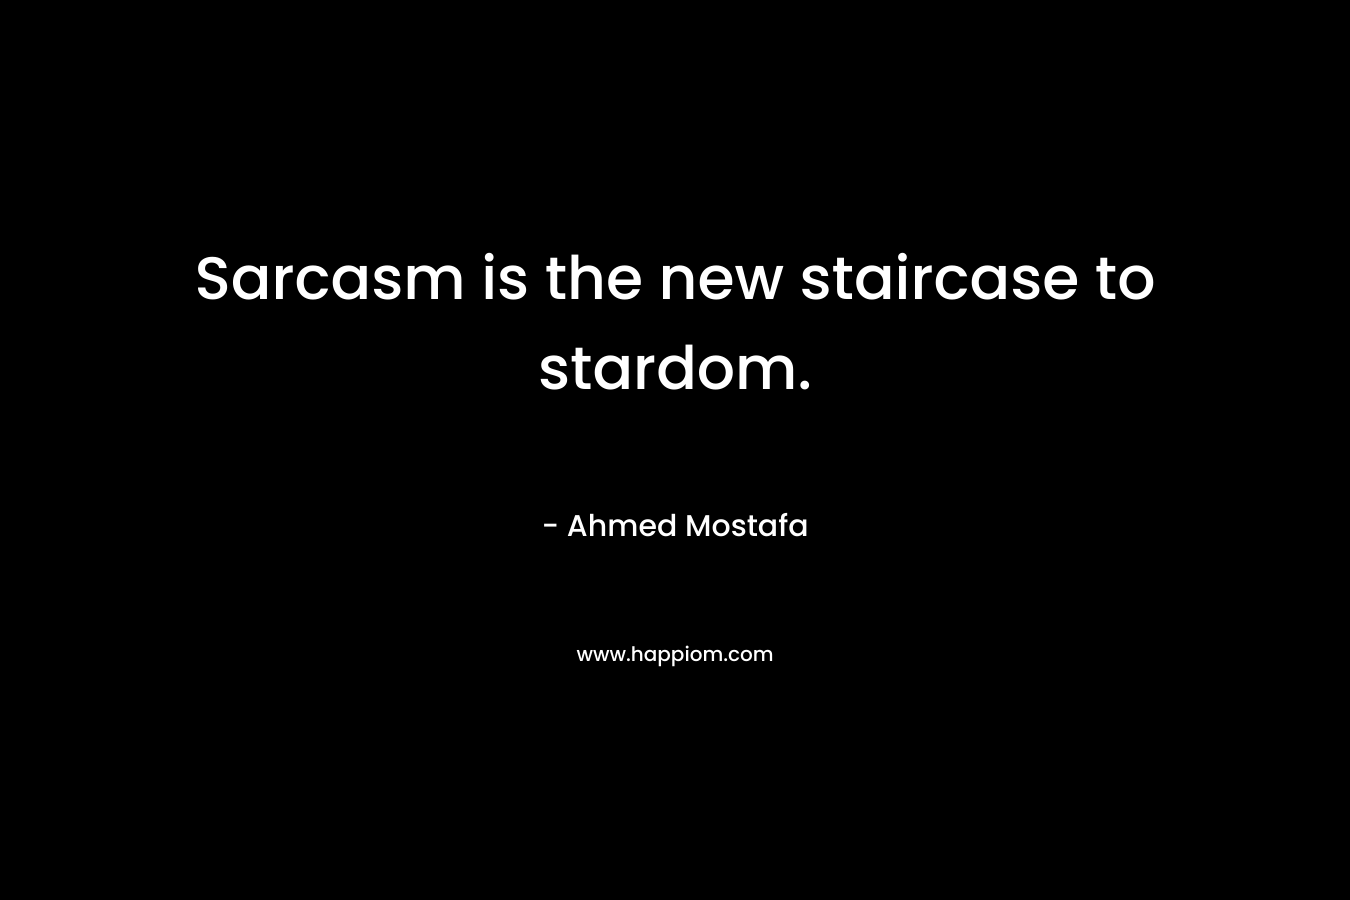 Sarcasm is the new staircase to stardom.